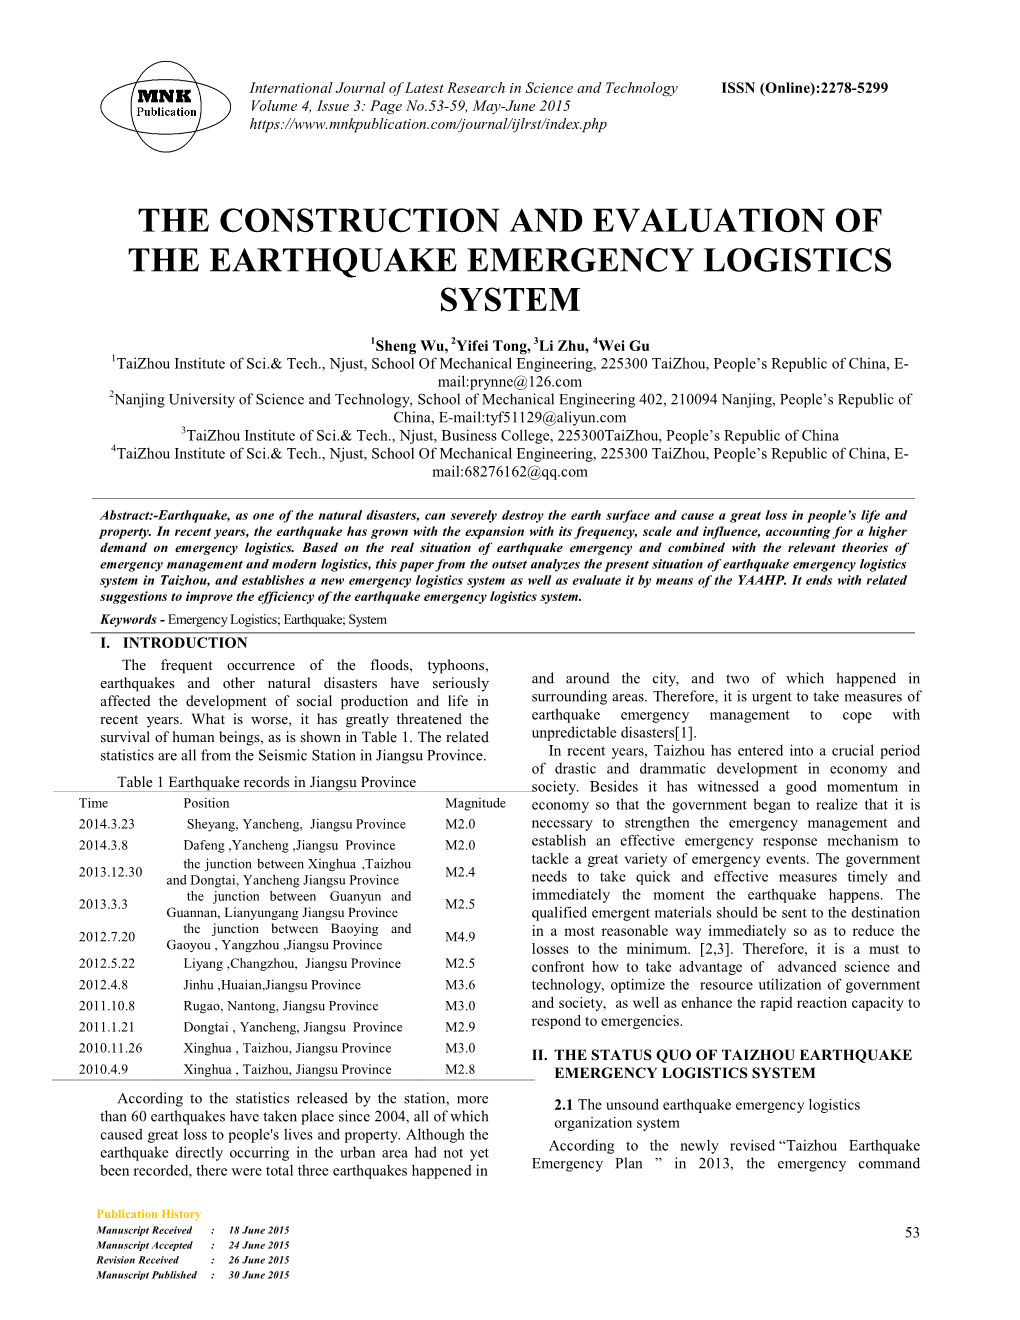 The Construction and Evaluation of the Earthquake Emergency Logistics System